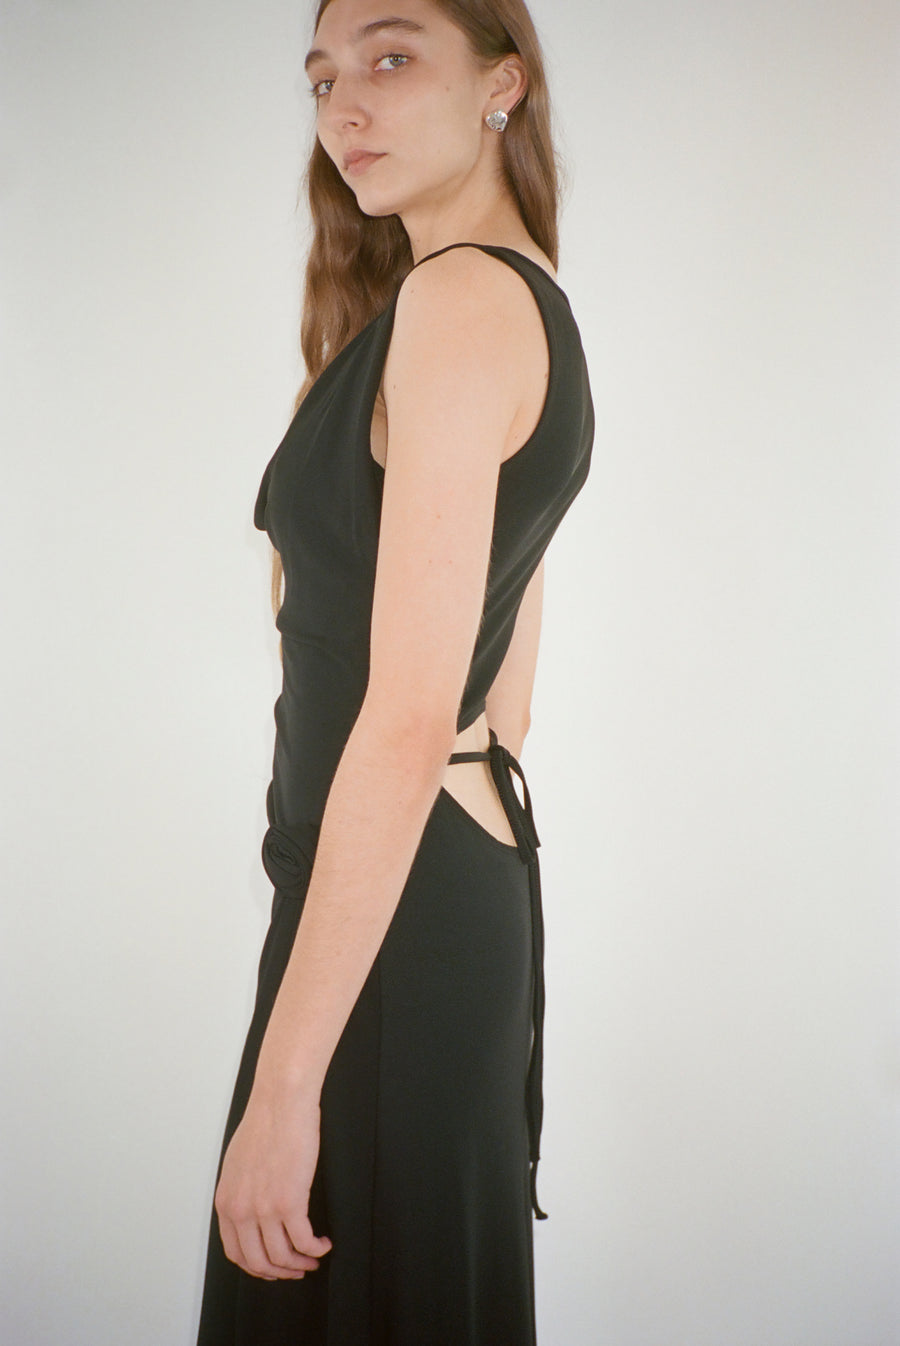 Midi length dress in black with draping and rose detail on model